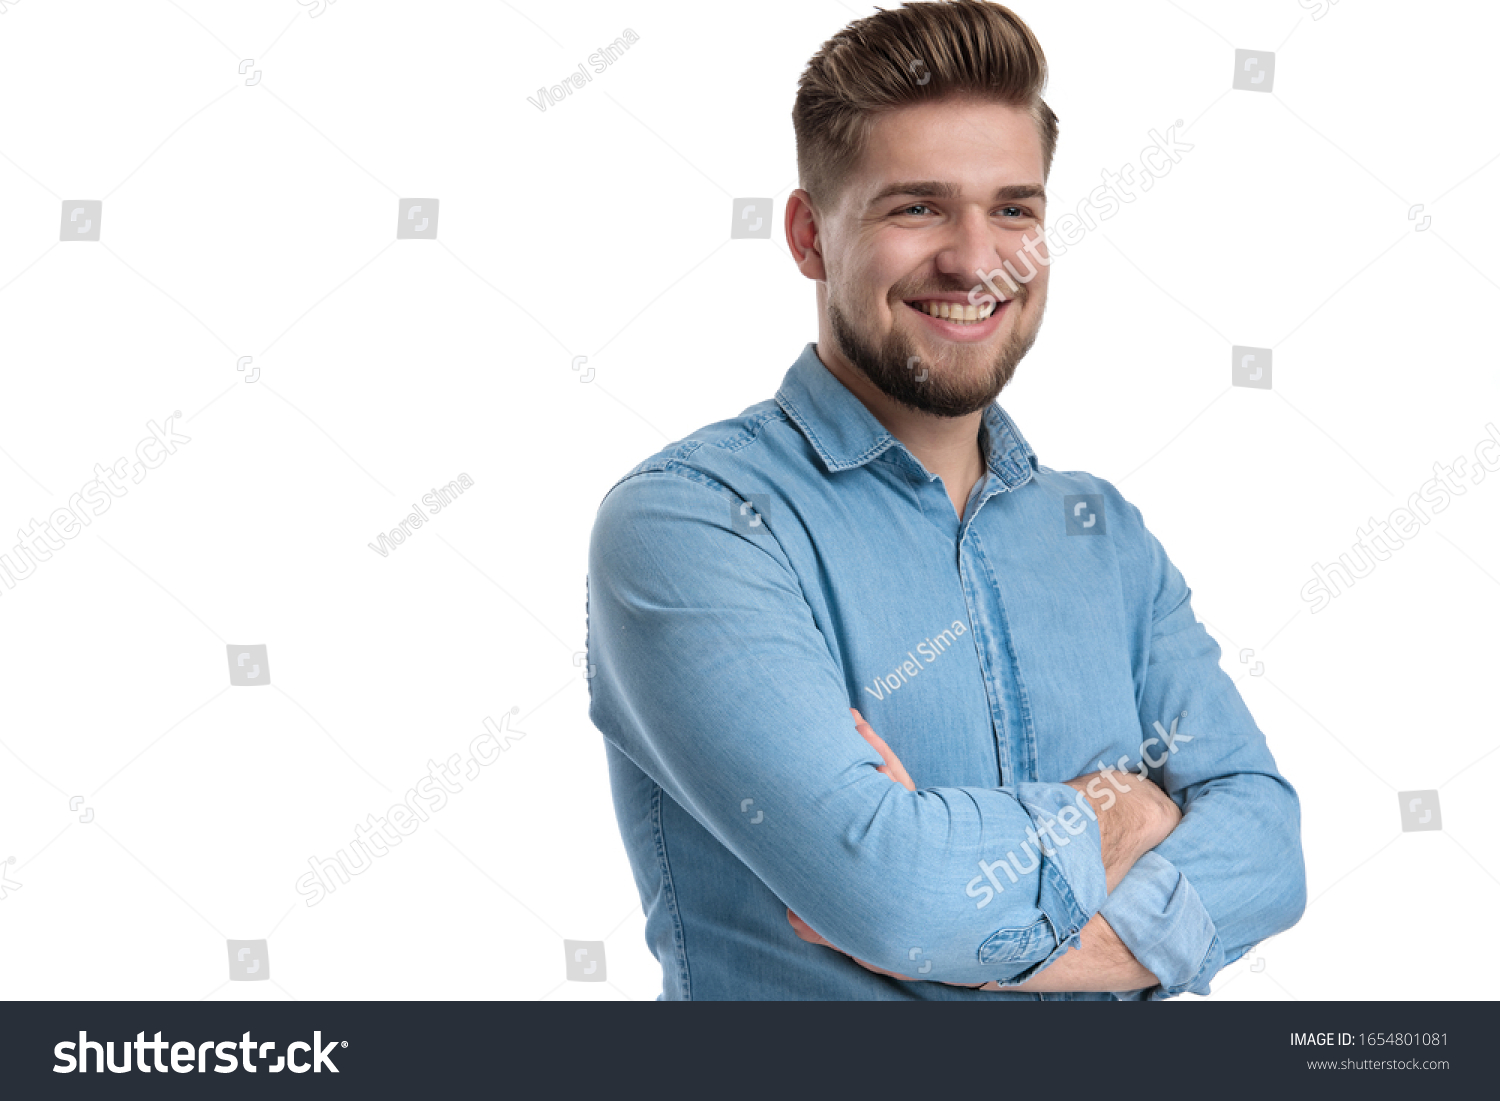 Cheerful casual man smiling and holding his hands folded at his chest, standing on white studio background #1654801081